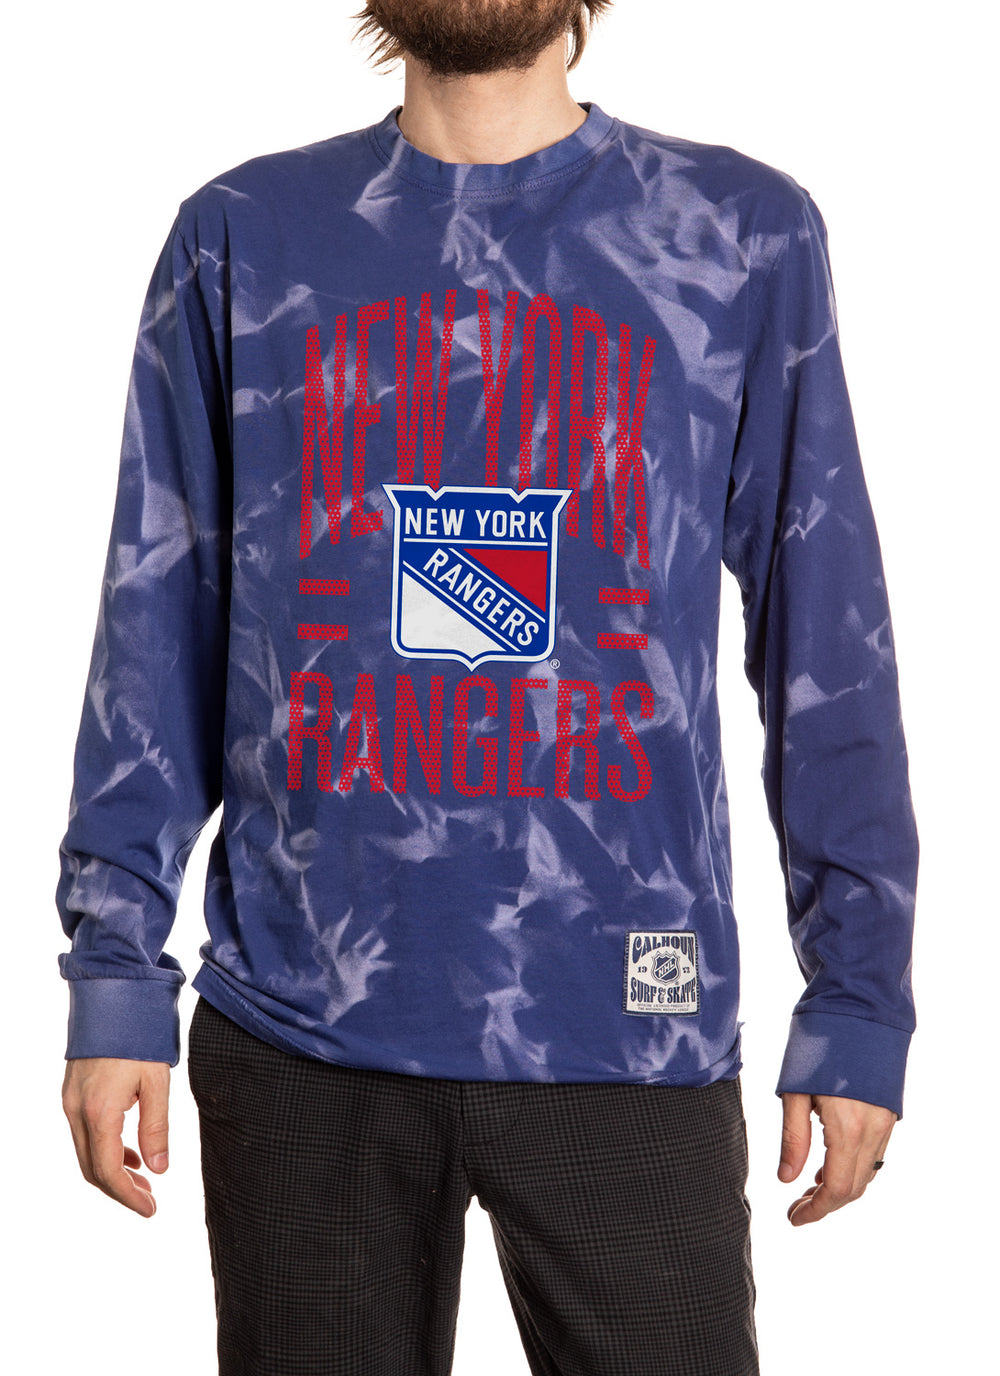 New York Rangers Crystal Tie Dye Long Sleeve Shirt Front View